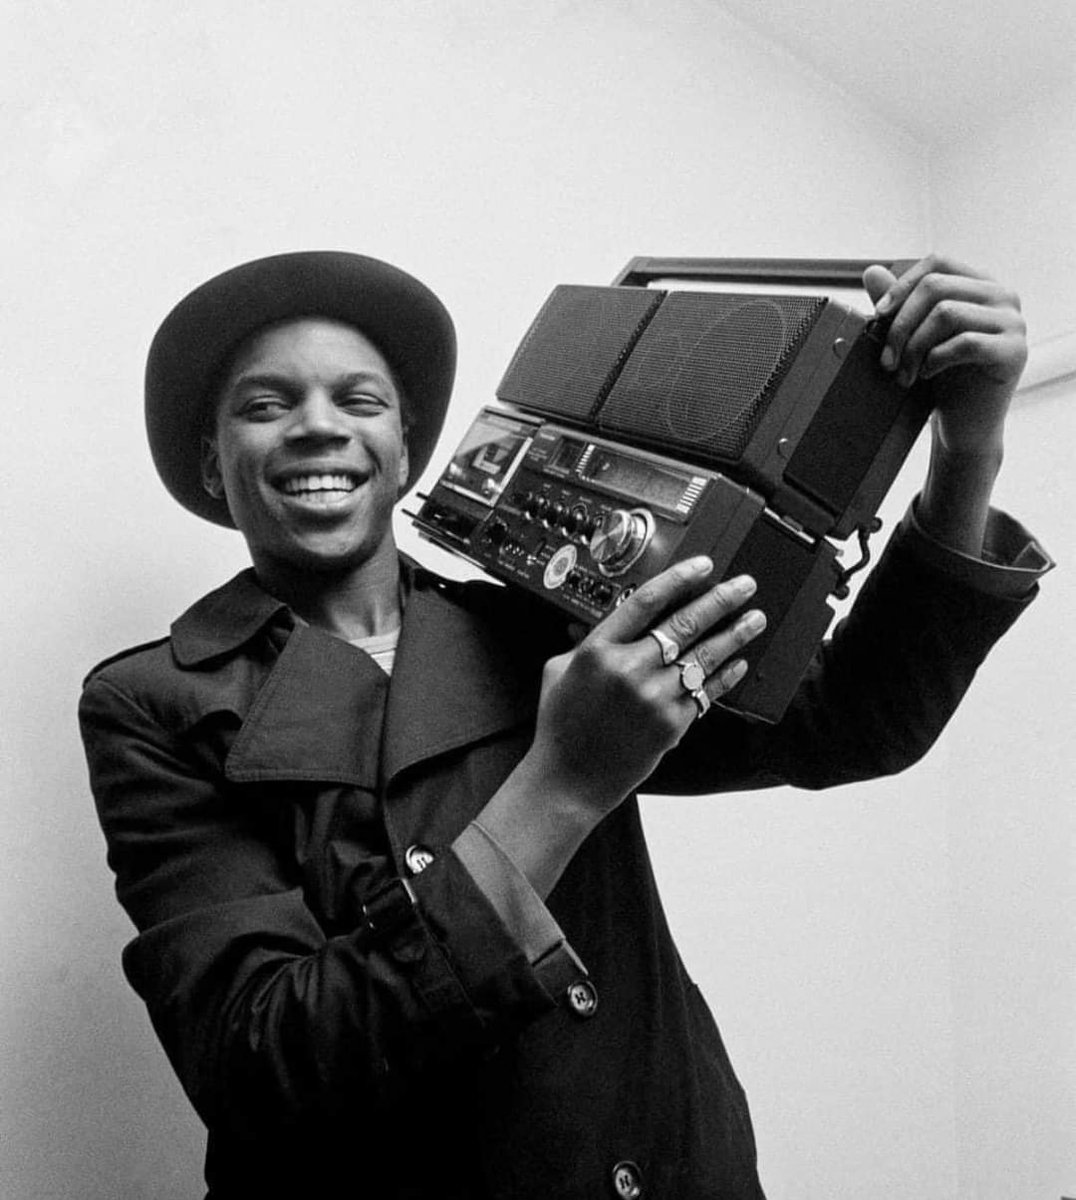 A cheer up pic for Monday of the late great Ranking Roger with respect and love